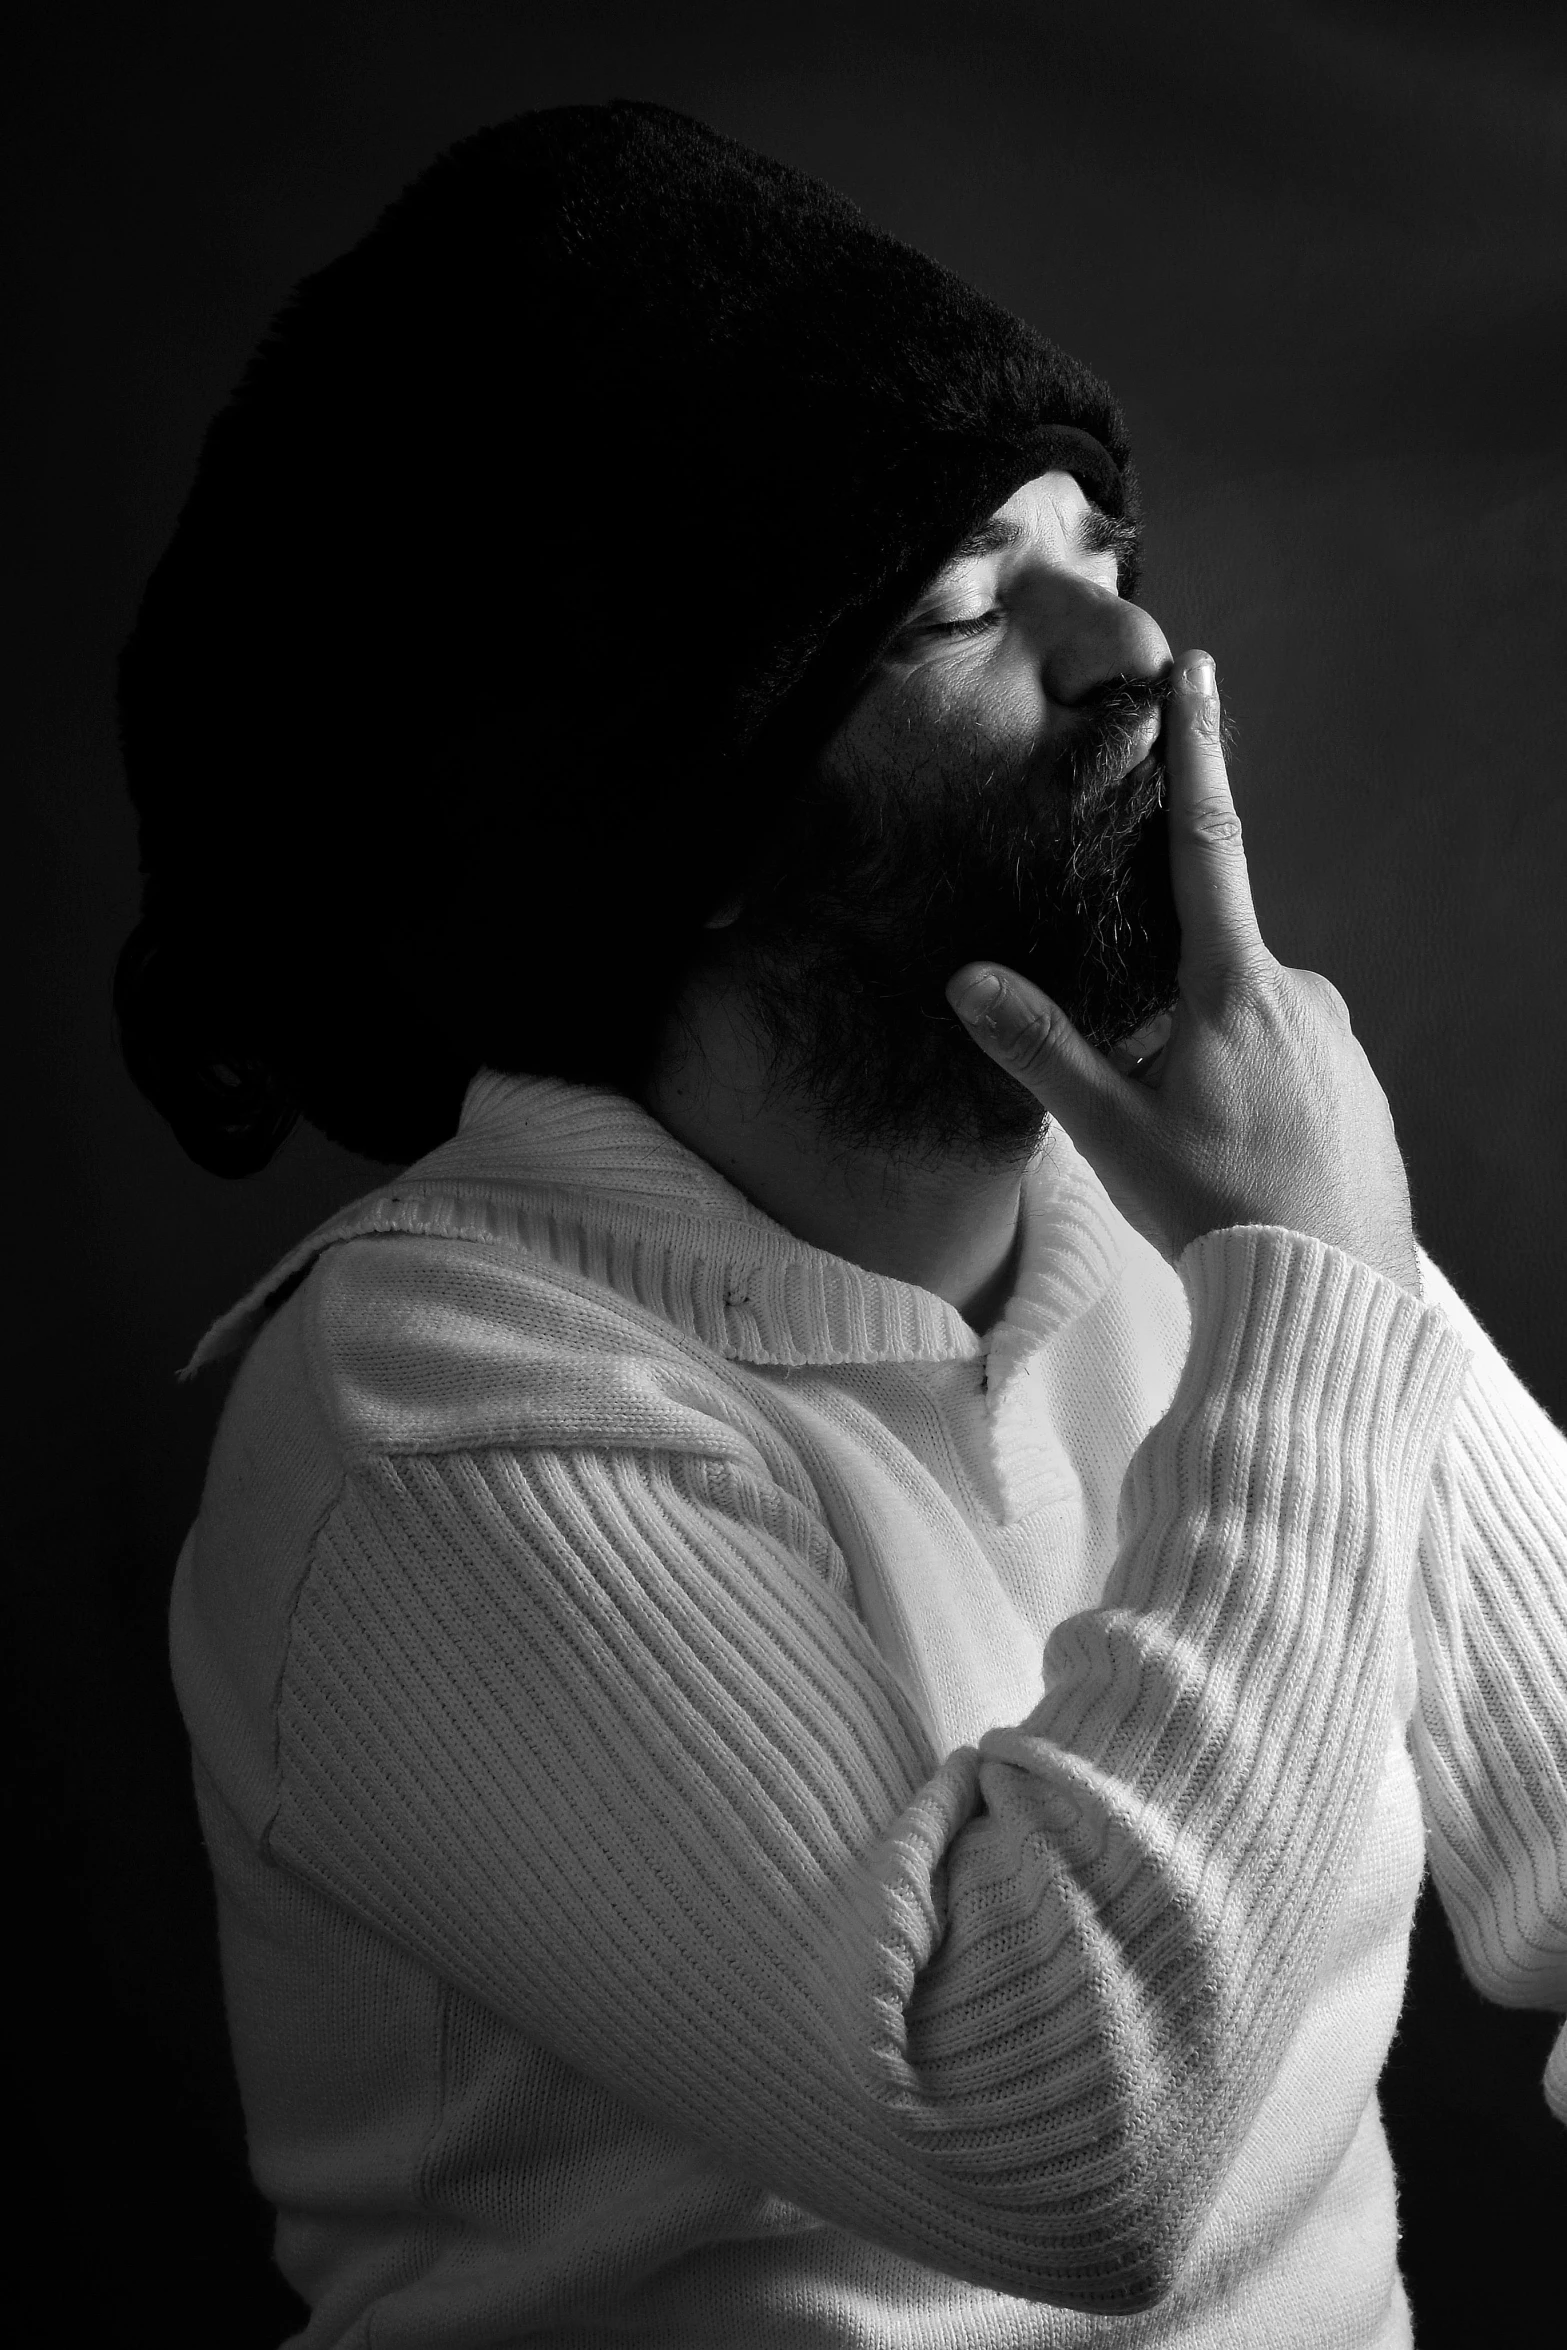 a bearded man wearing a black hat talking on a cell phone